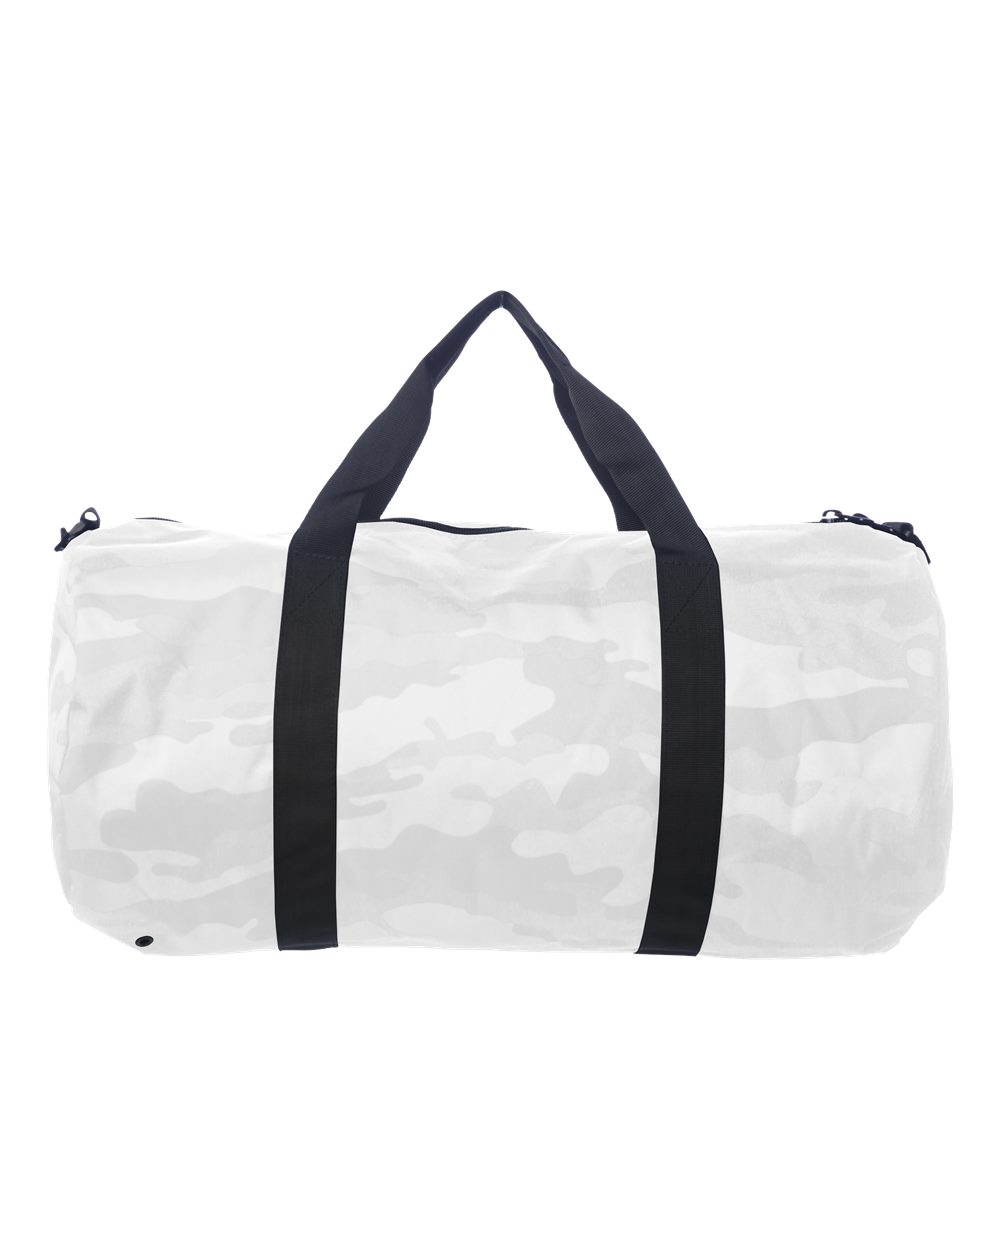 Independent Trading Co. 29L Day Tripper Duffel Bag